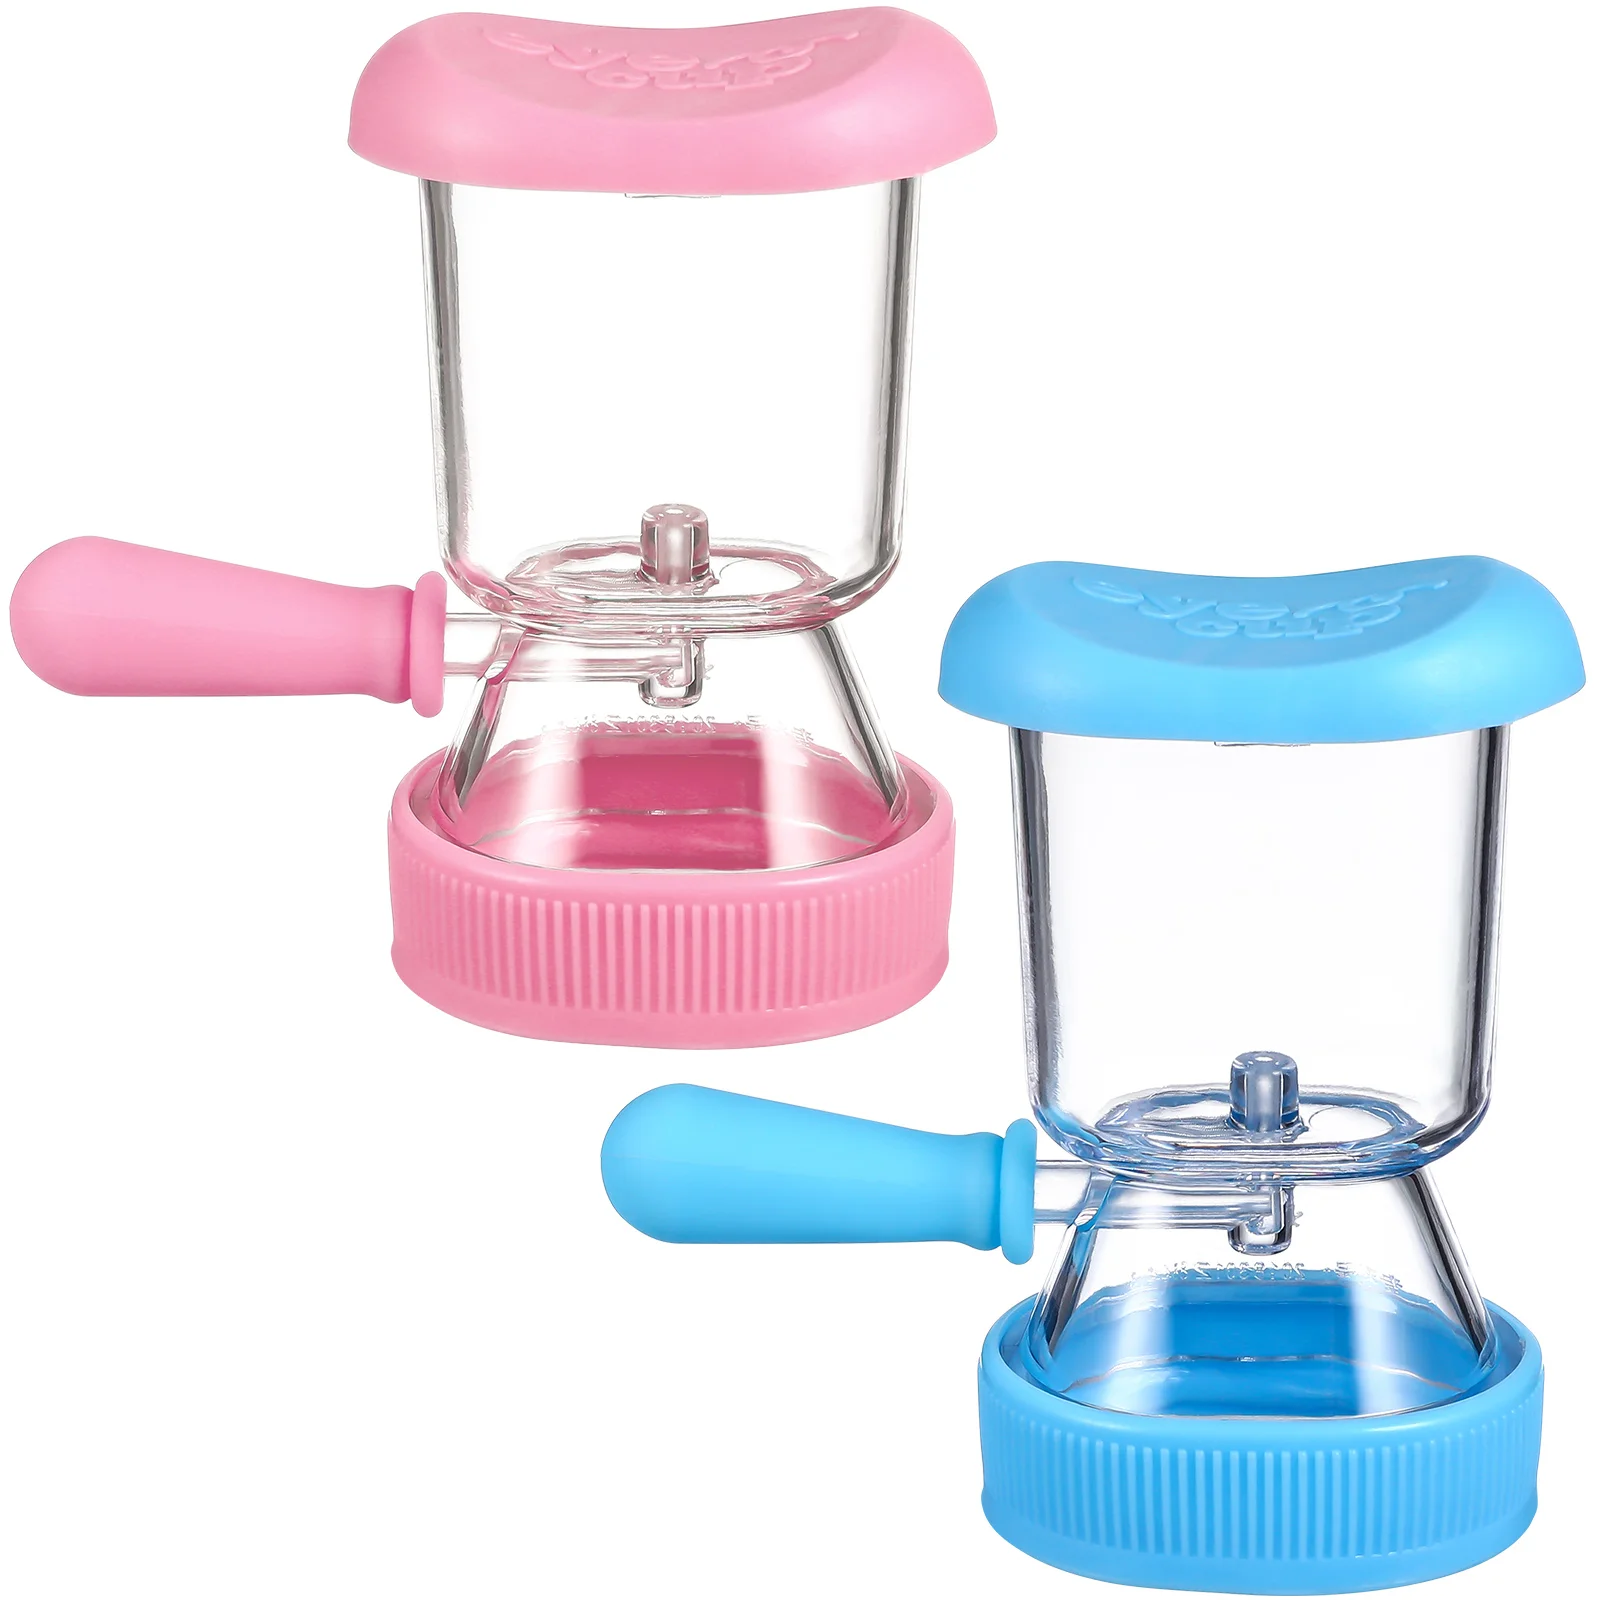 

2 Pcs Premium Portable Cleaning Tools Professional Eye Wash Cups Eye Bath Cups Eye Bath Containers Eye Cup Cleaners